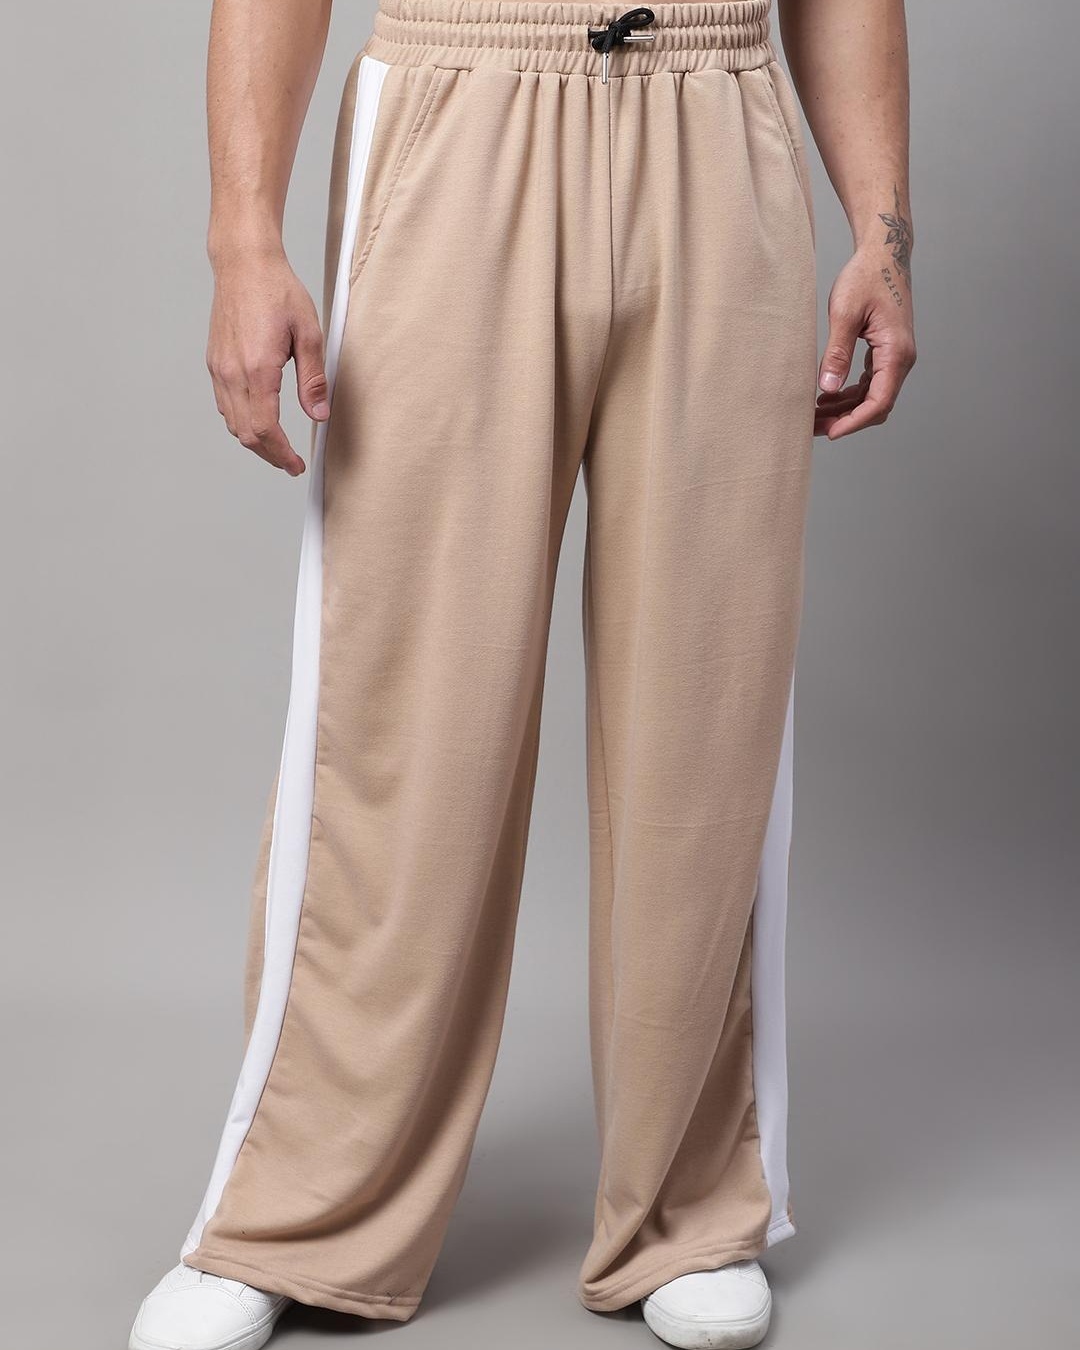 Buy Men's Beige Striped Relaxed Fit Track Pants Online at Bewakoof